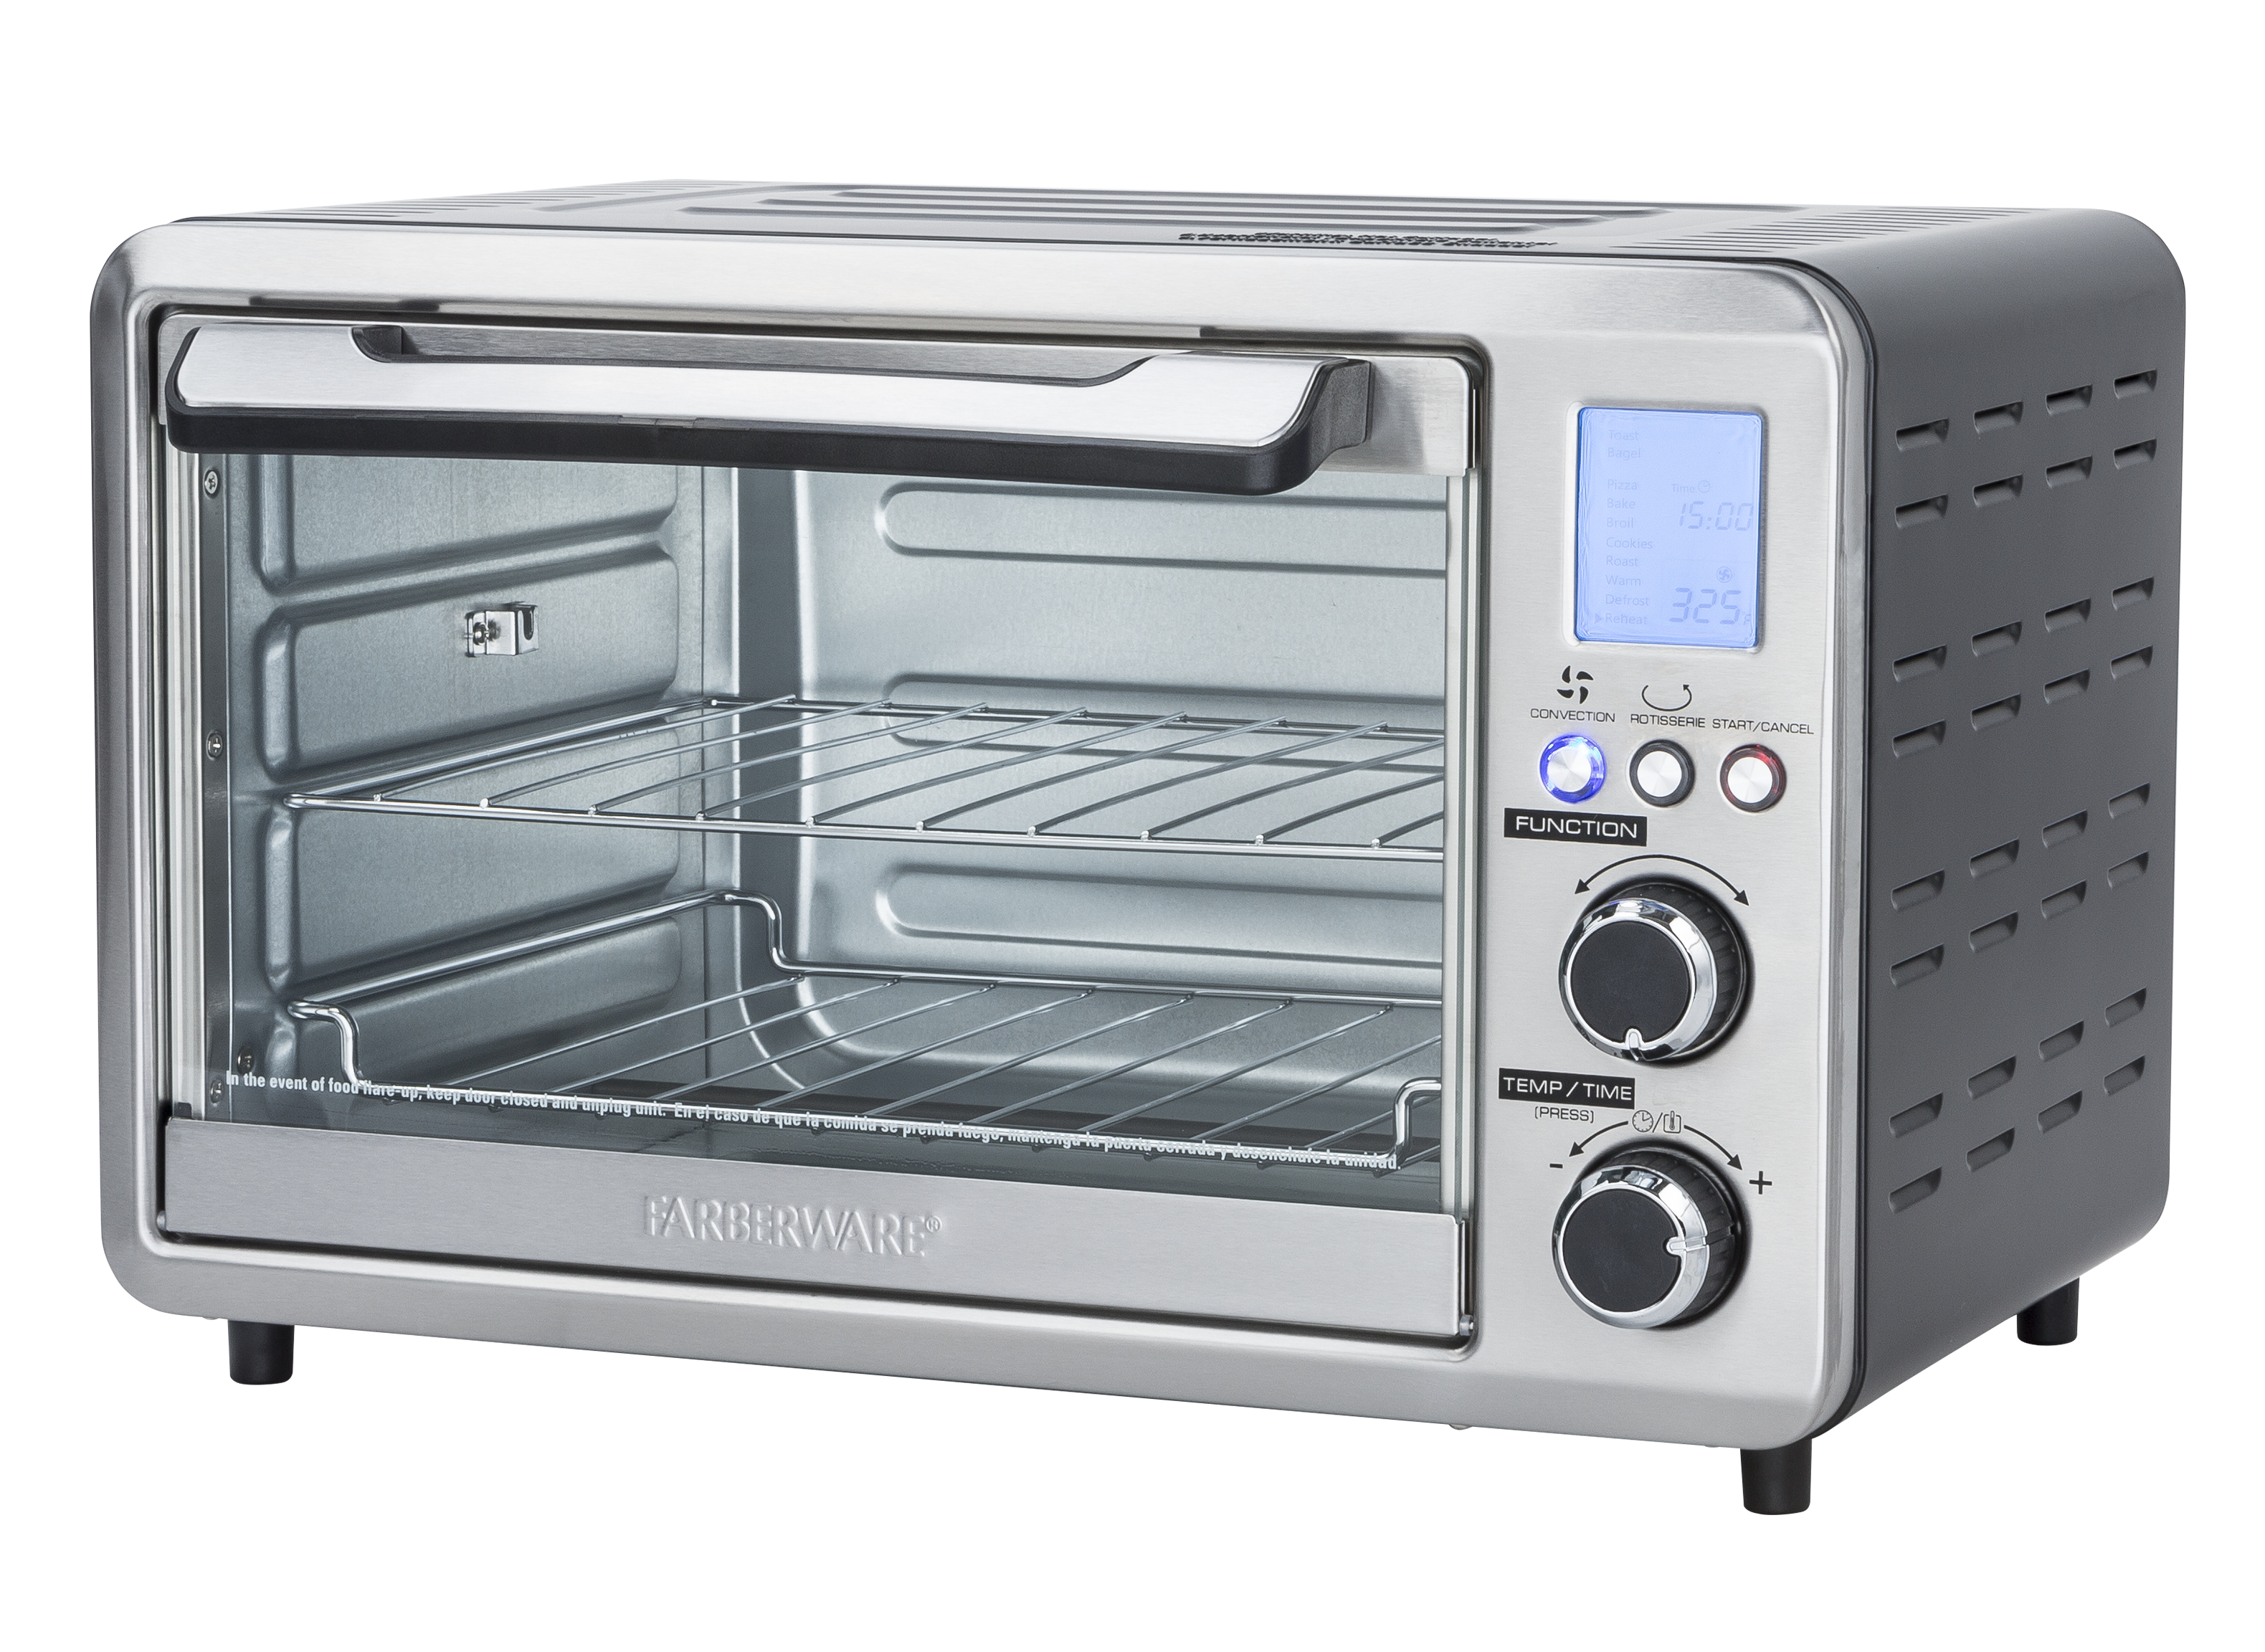 https://crdms.images.consumerreports.org/prod/products/cr/models/389601-toasterovens-farberware-25ldigital510915walmartexclusive.png